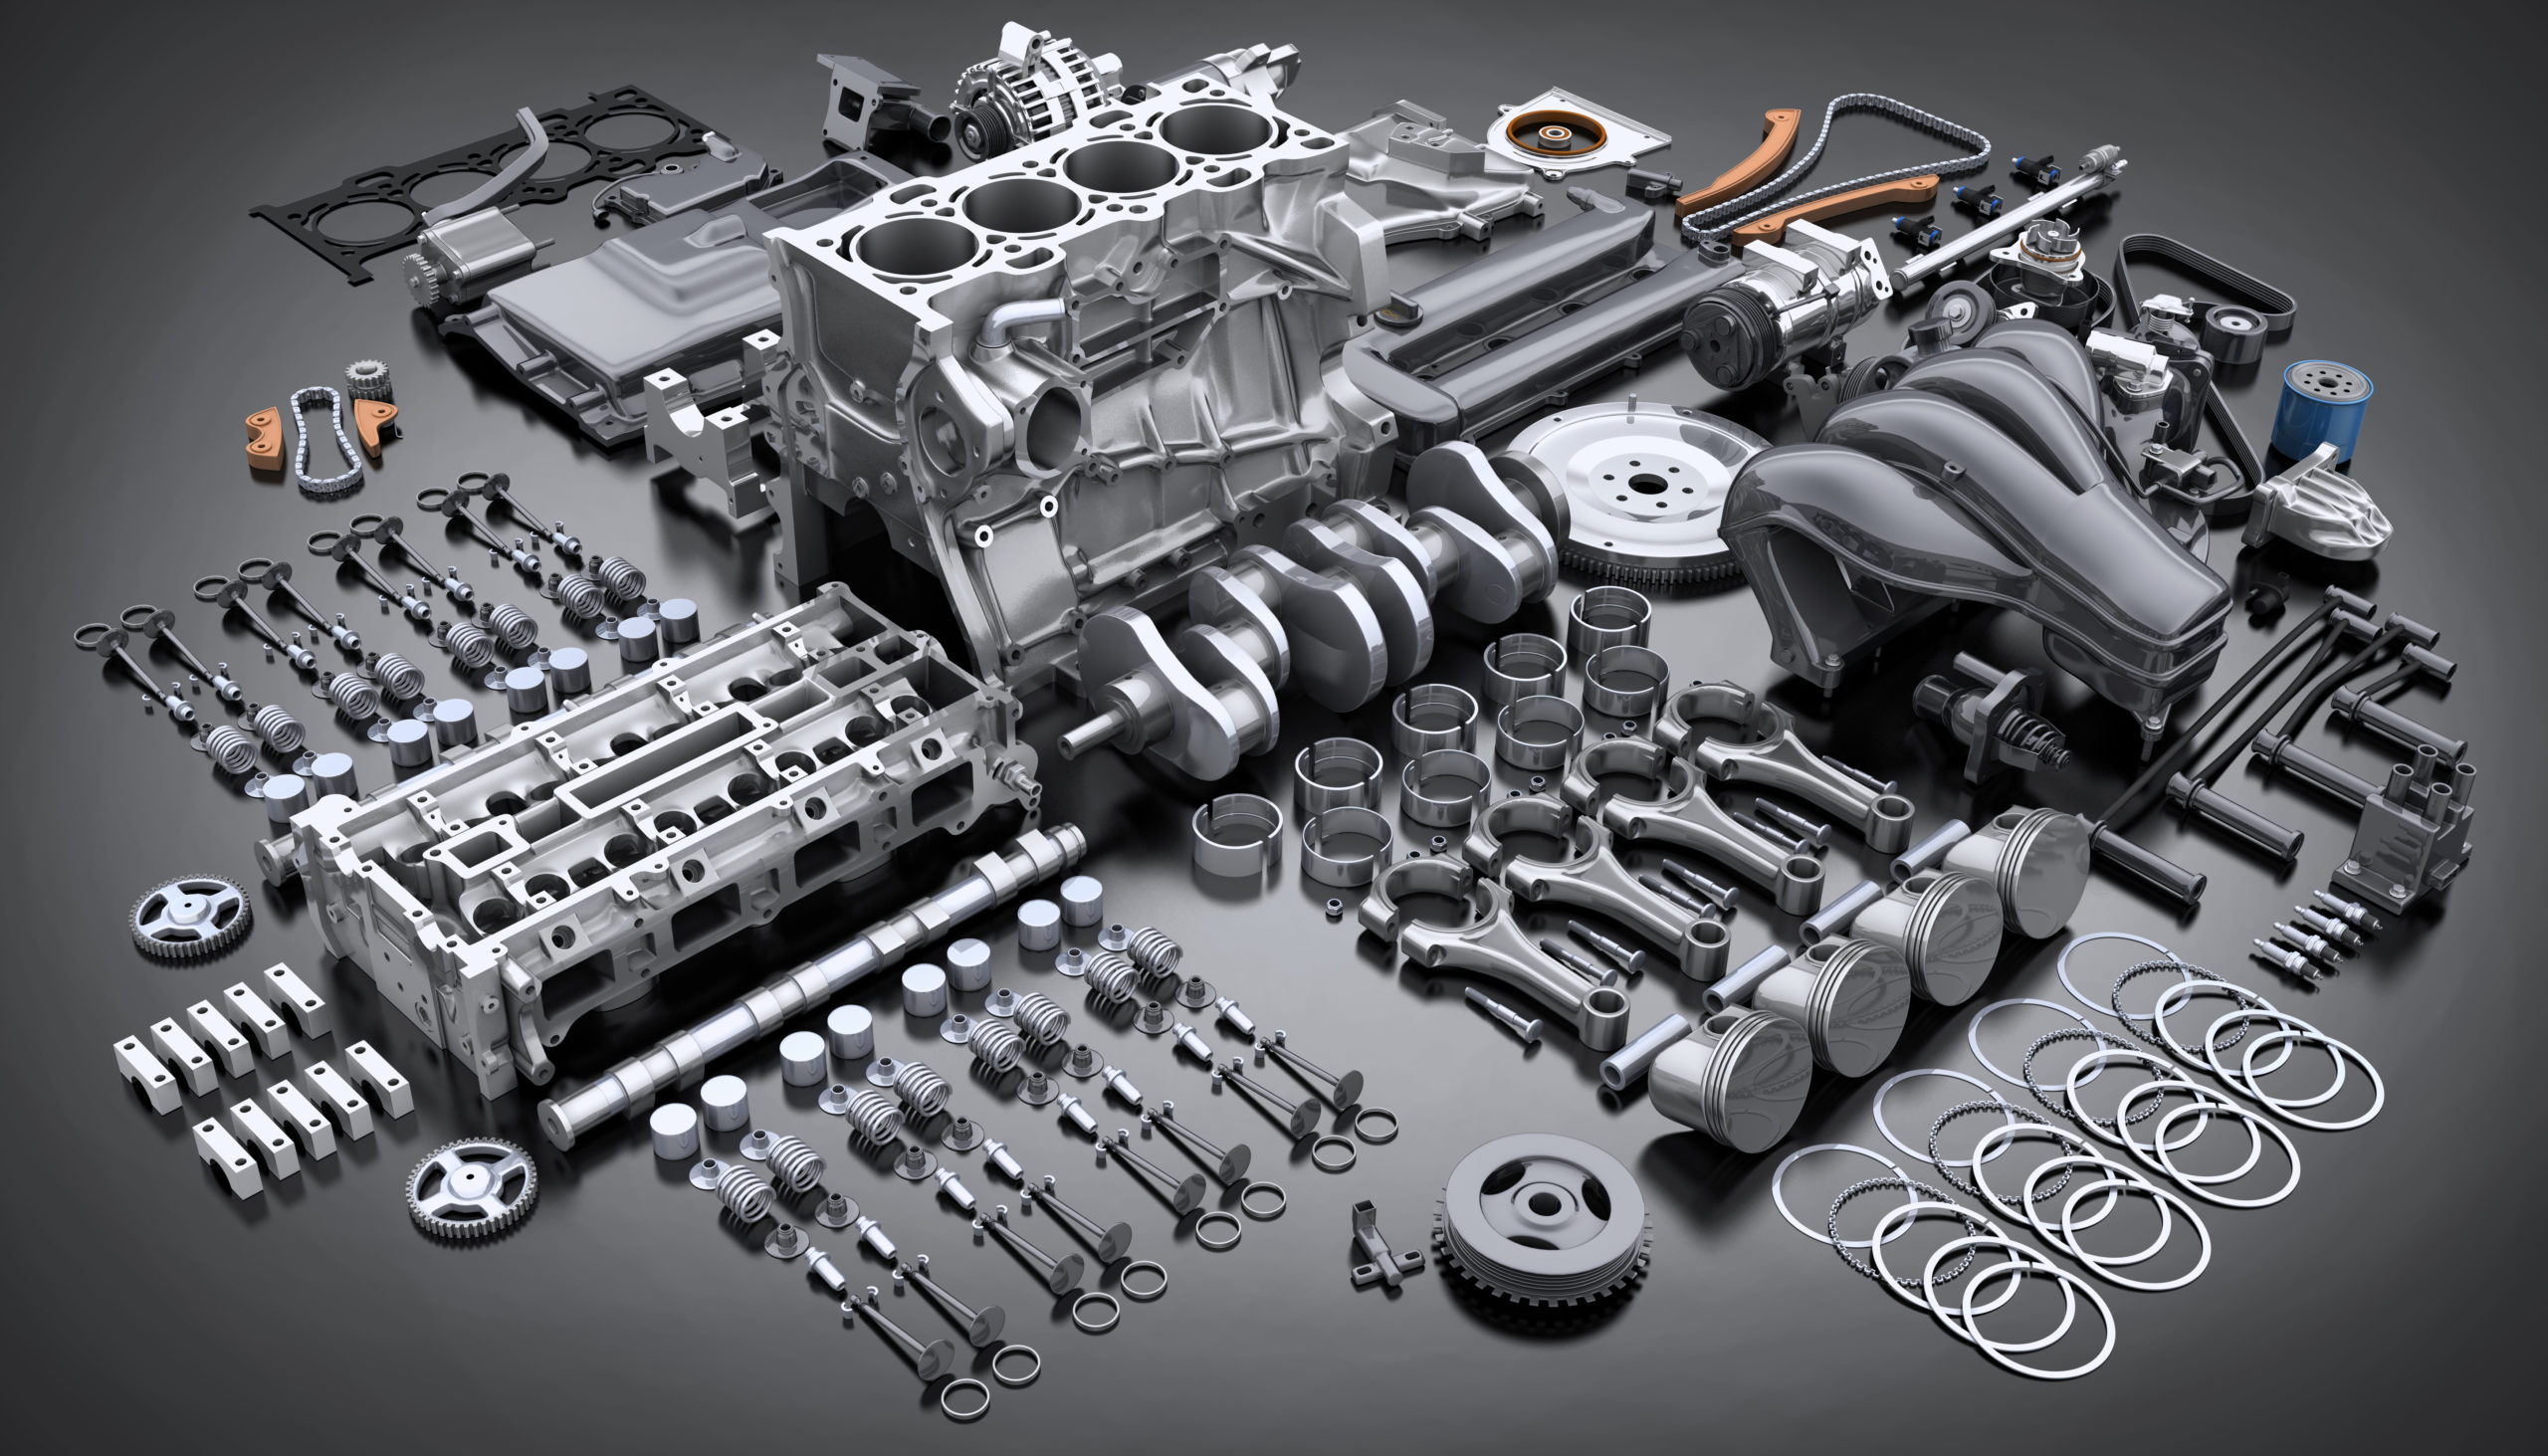 New Versus Rebuilt Truck Engines. What’s The Difference?